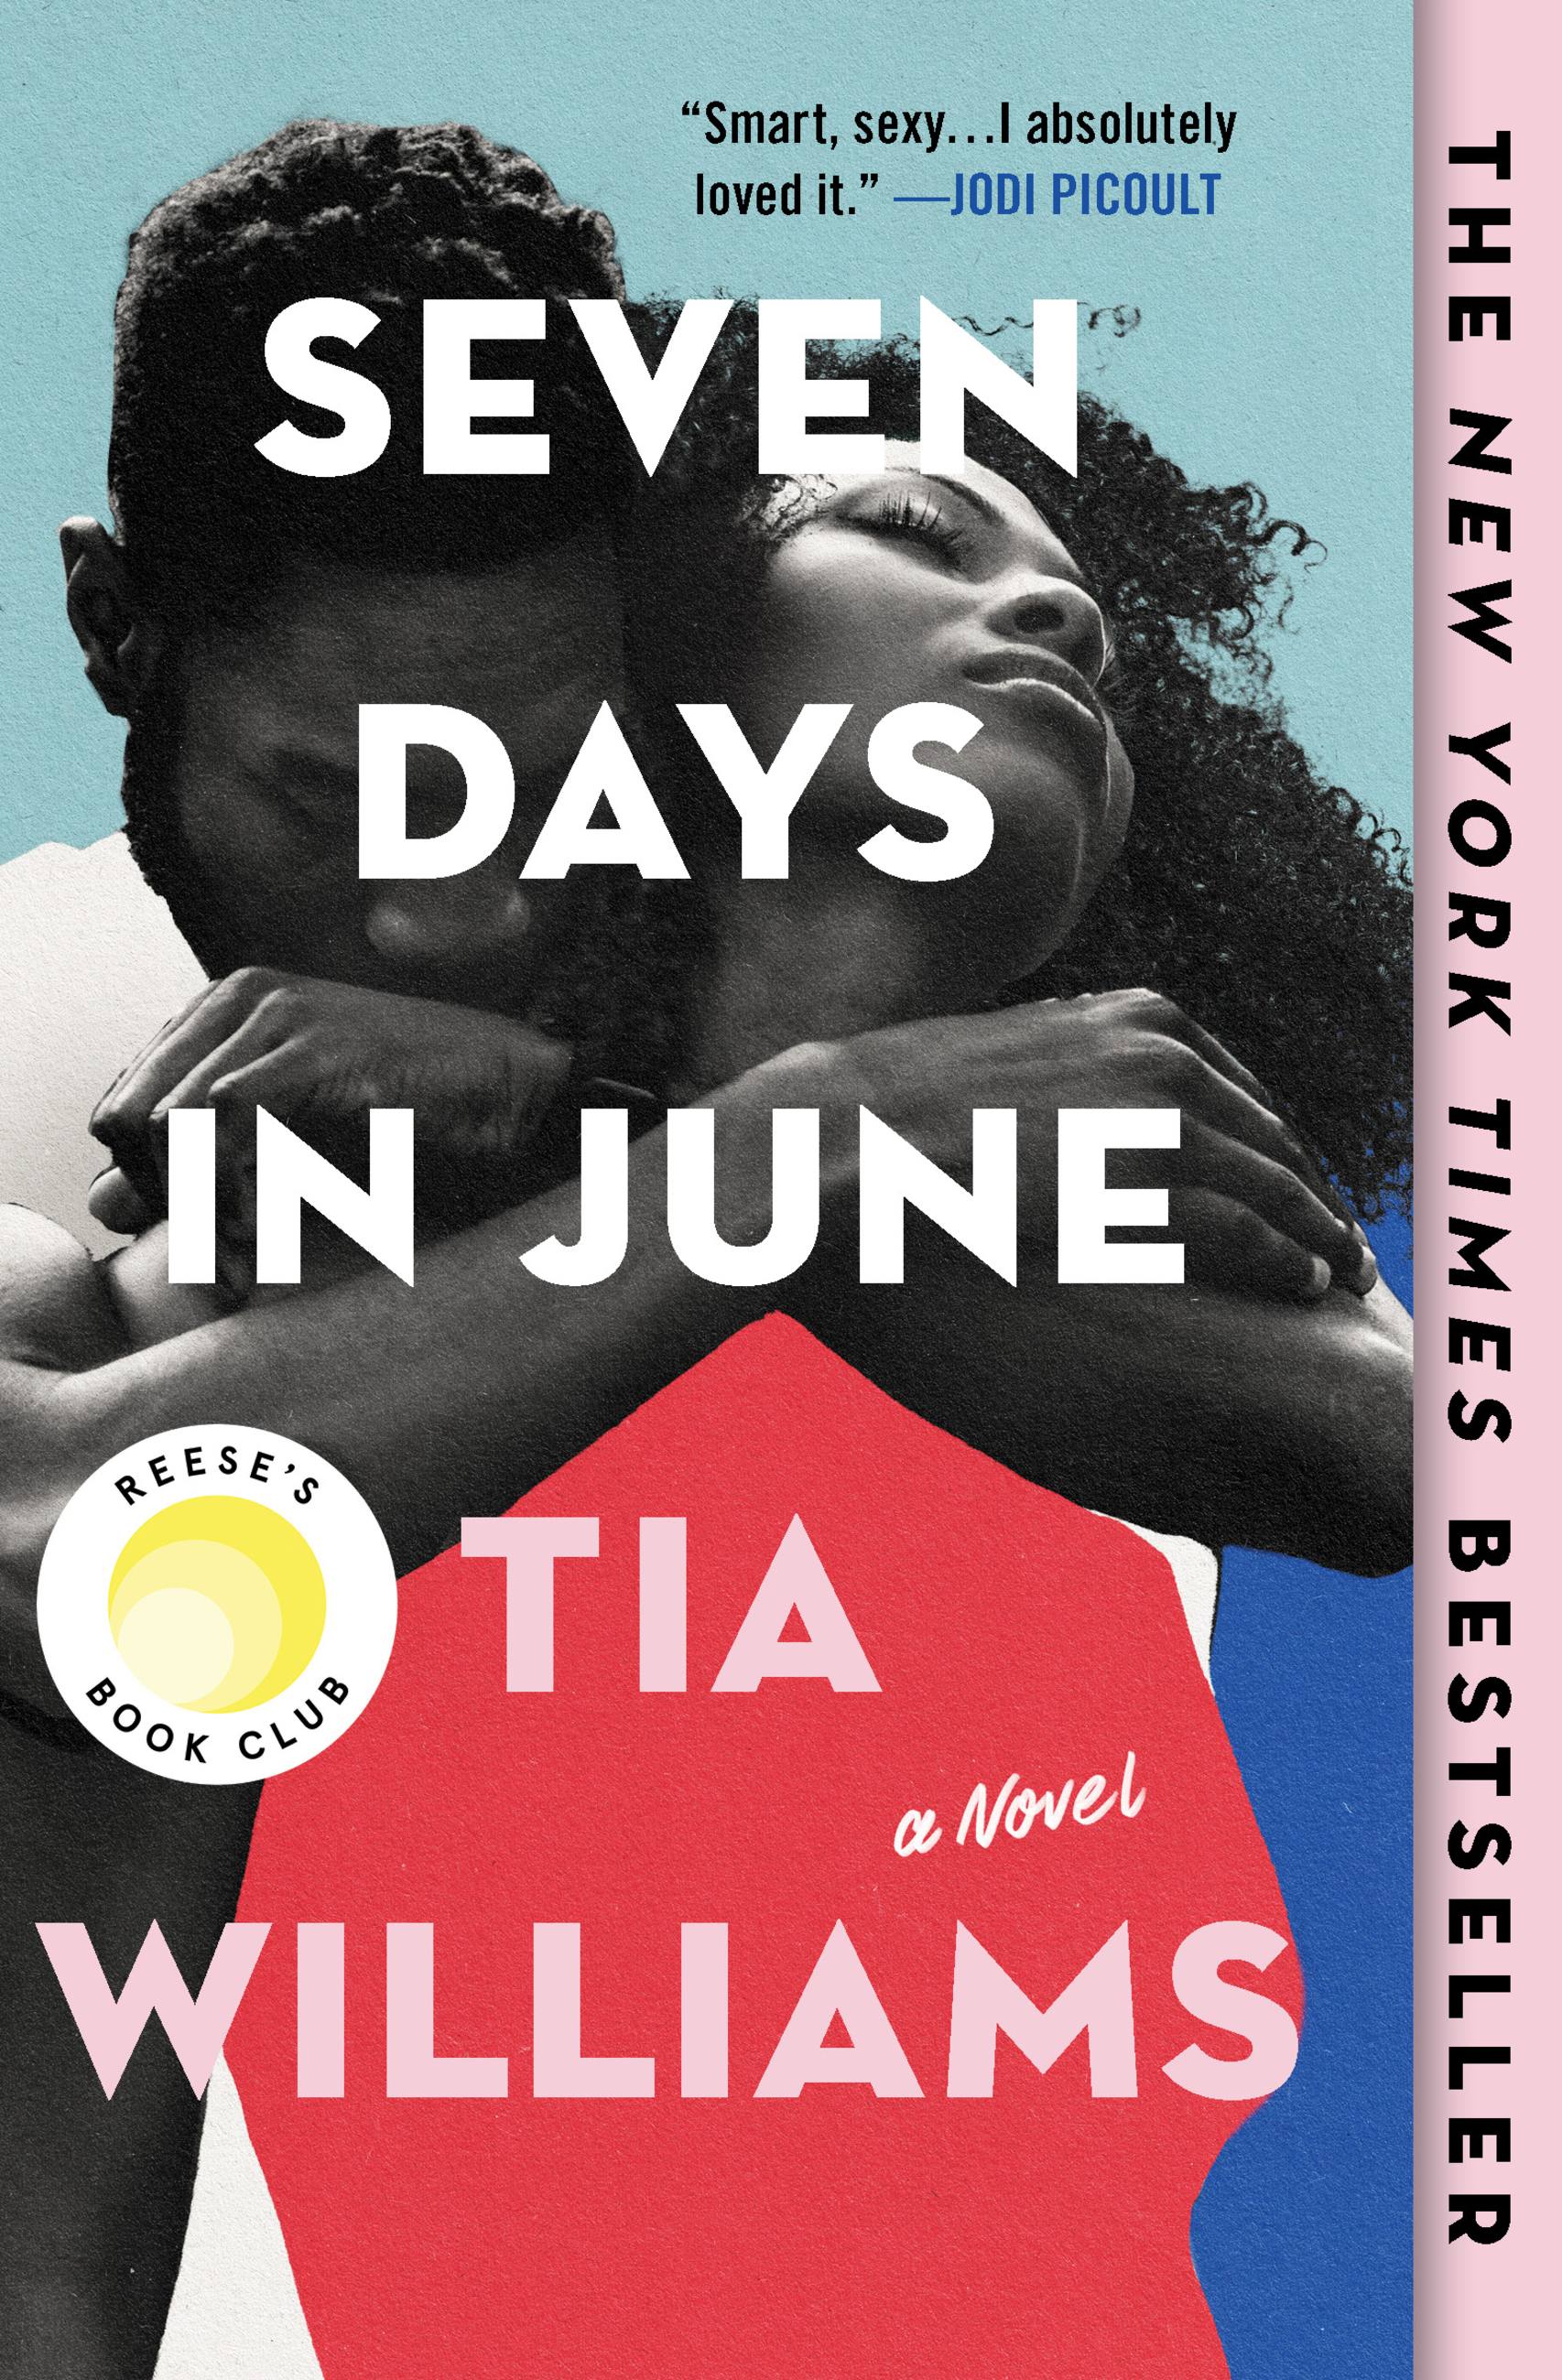 Seven Days in June by Tia Williams | Hachette Book Group